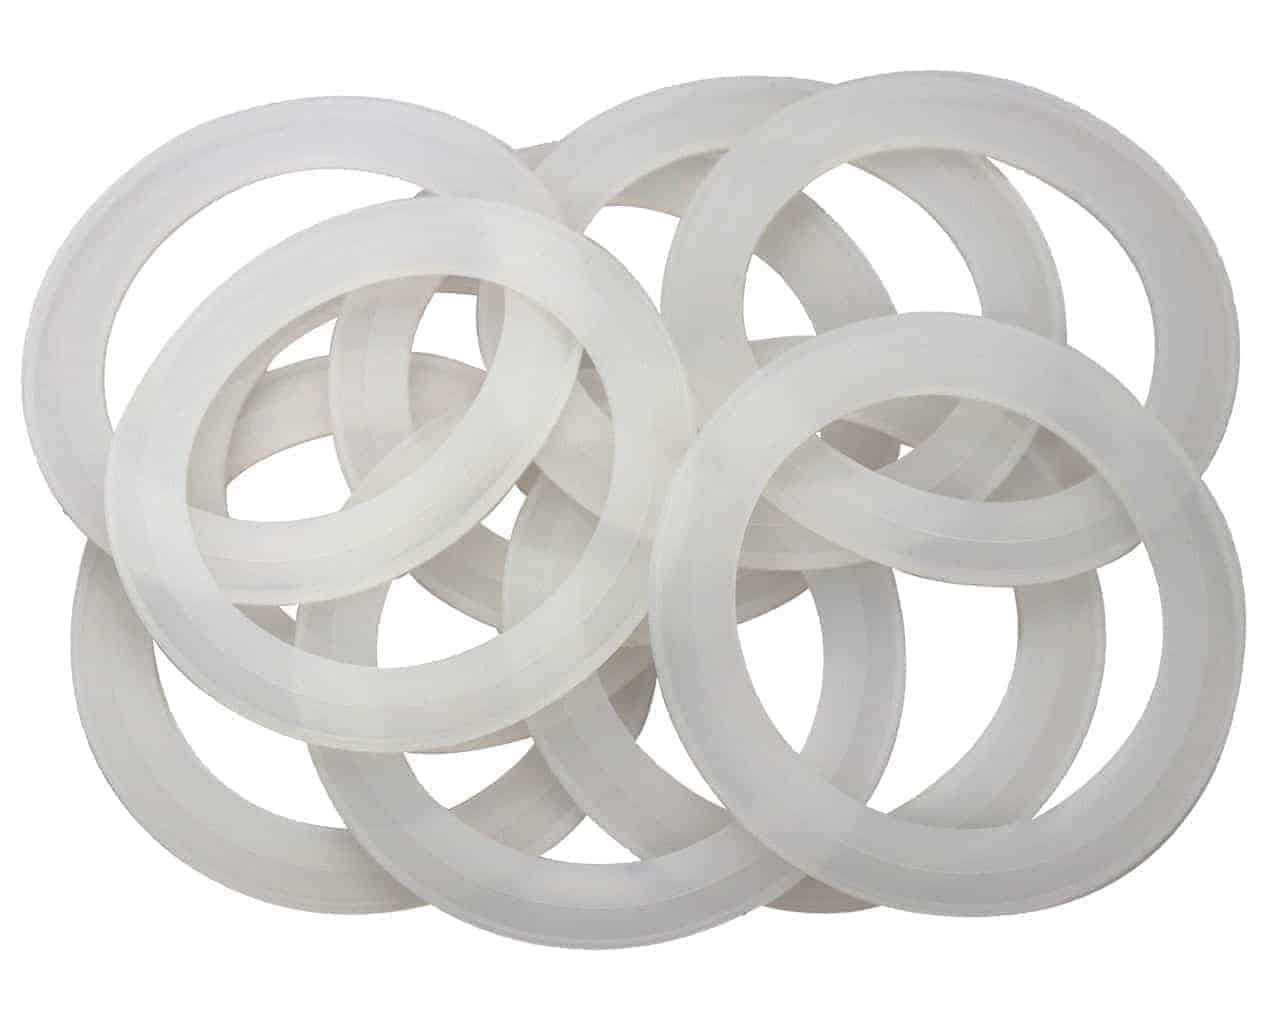 Leak Proof Silicone Sealing Rings Seals for Ball Plastic Caps